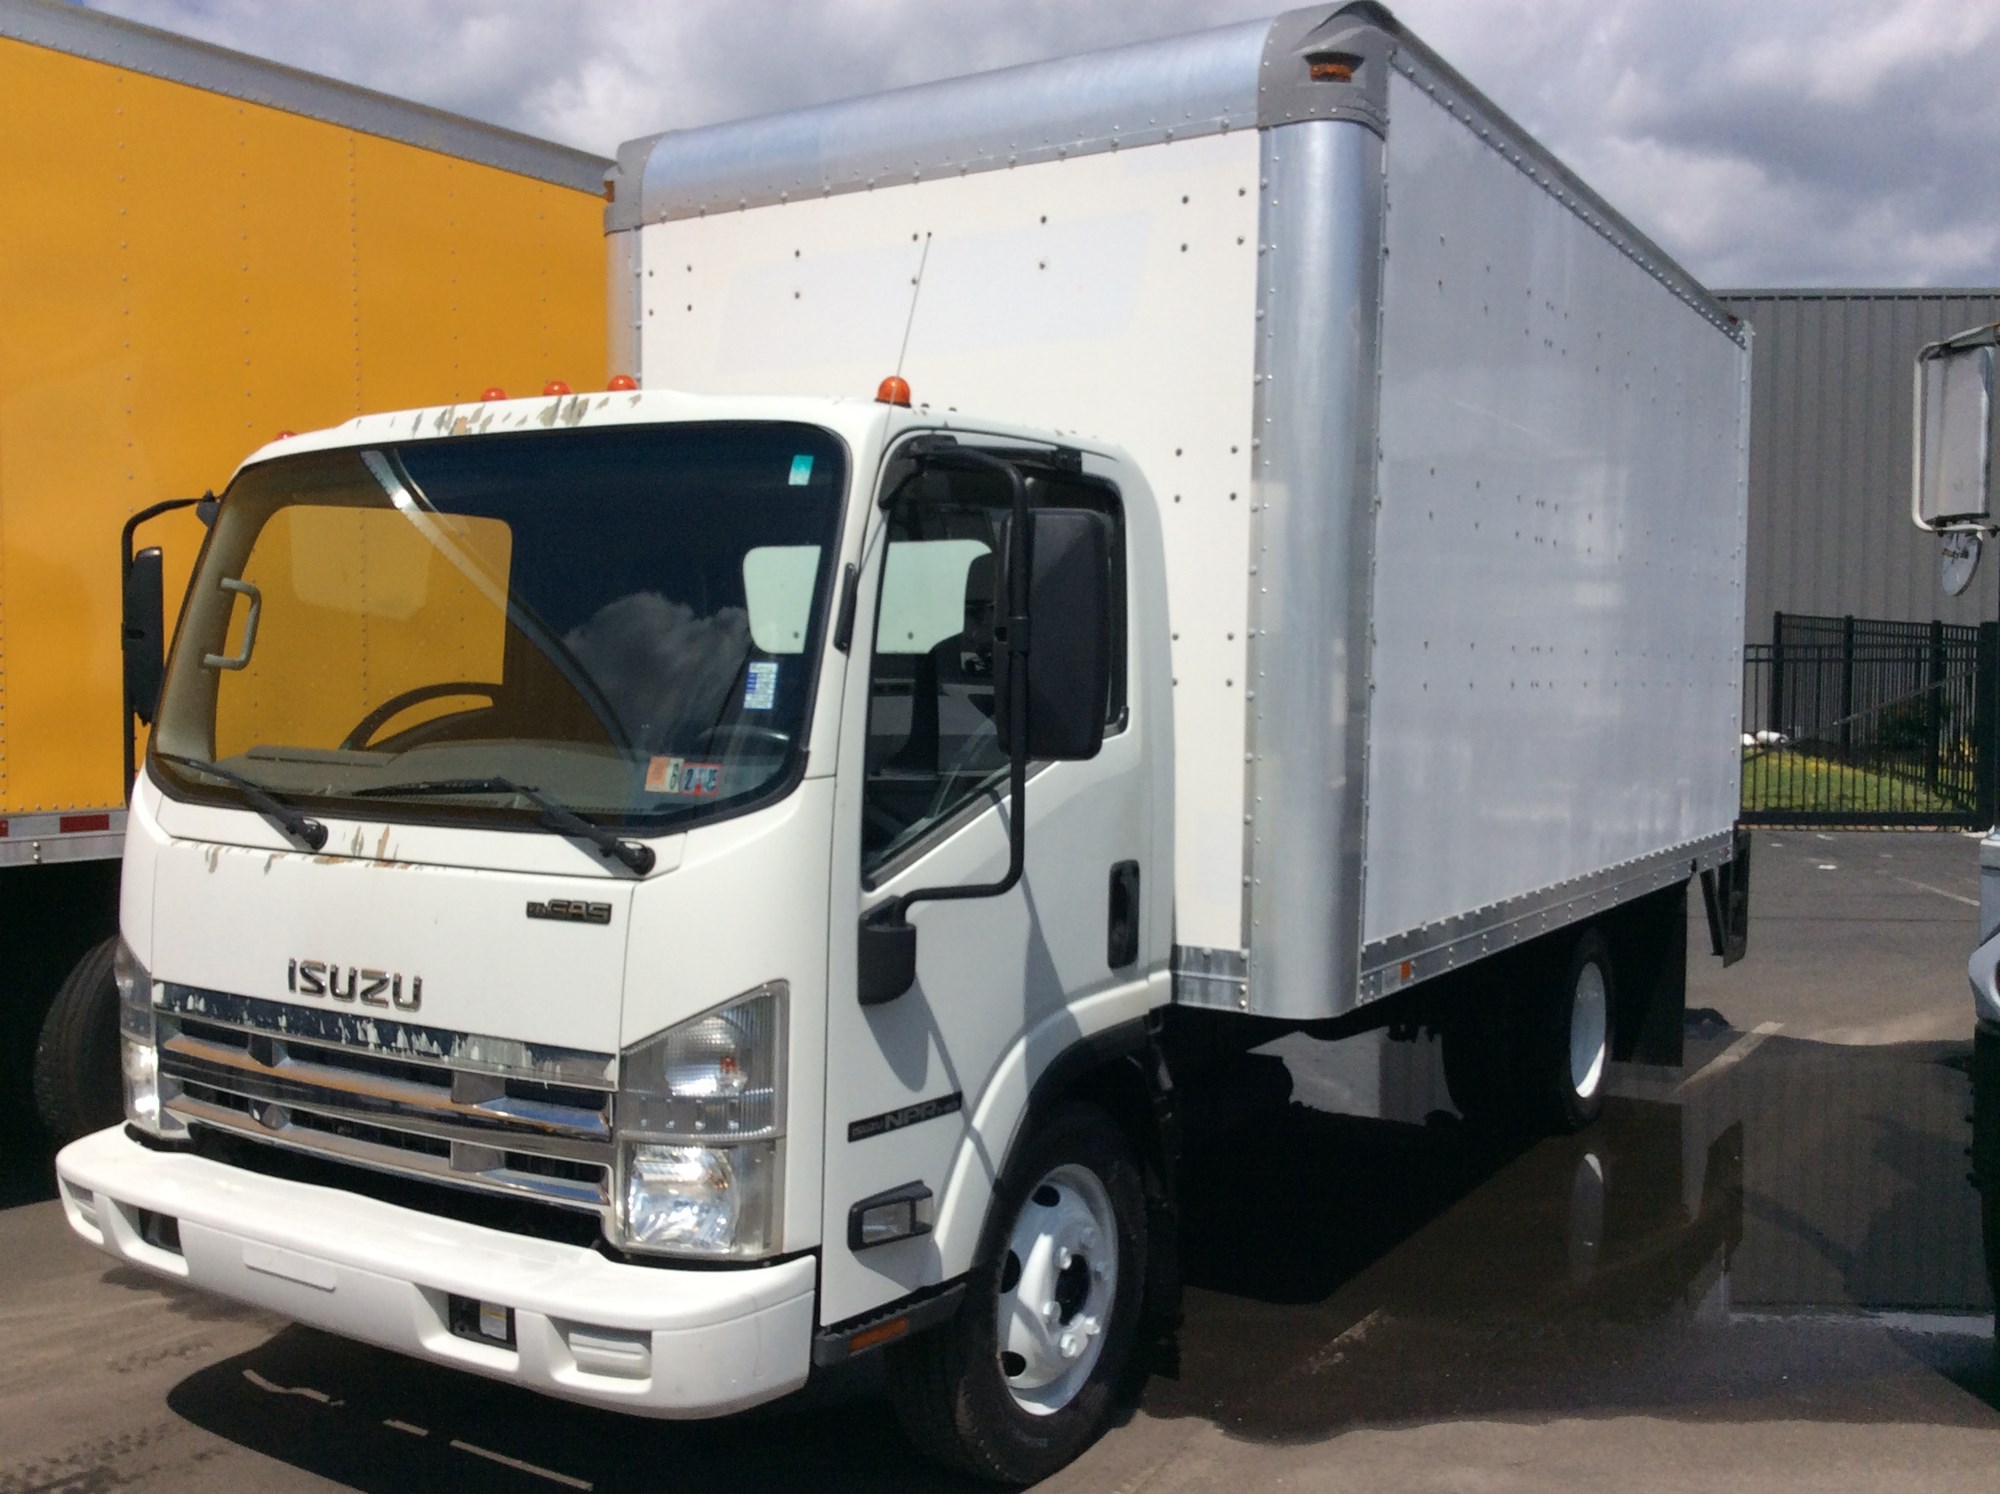 Used Truck Inventory - 1022580 01 - 19